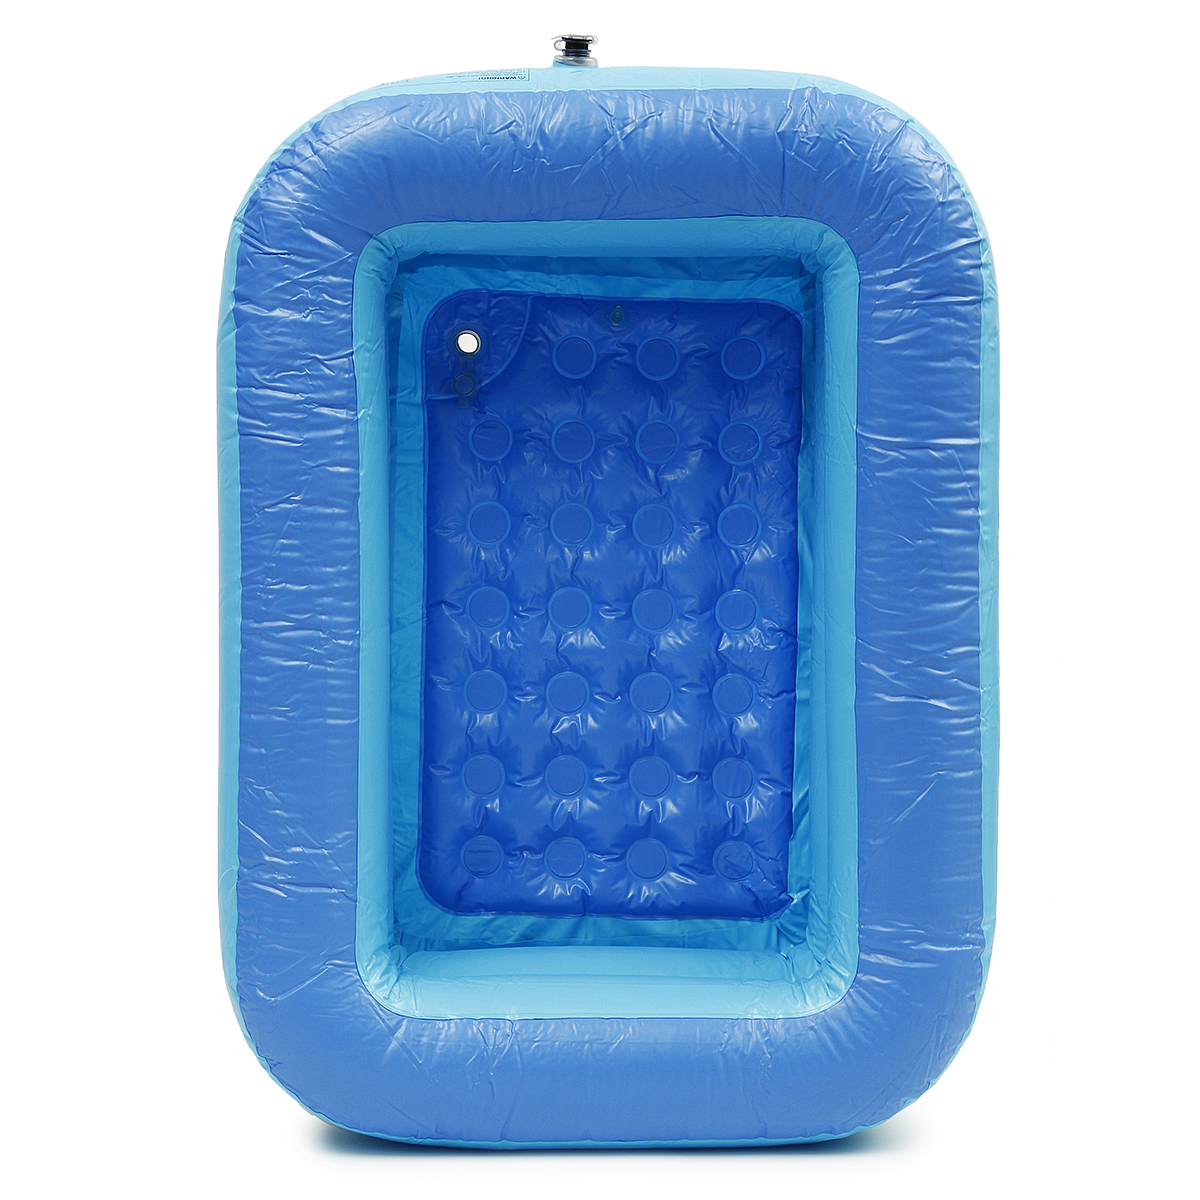 Baby-kids-Toddler-Child-PVC-Inflatable-Swimming-Pools-Bath-Spas-Summer-Fun-Toy-1293948